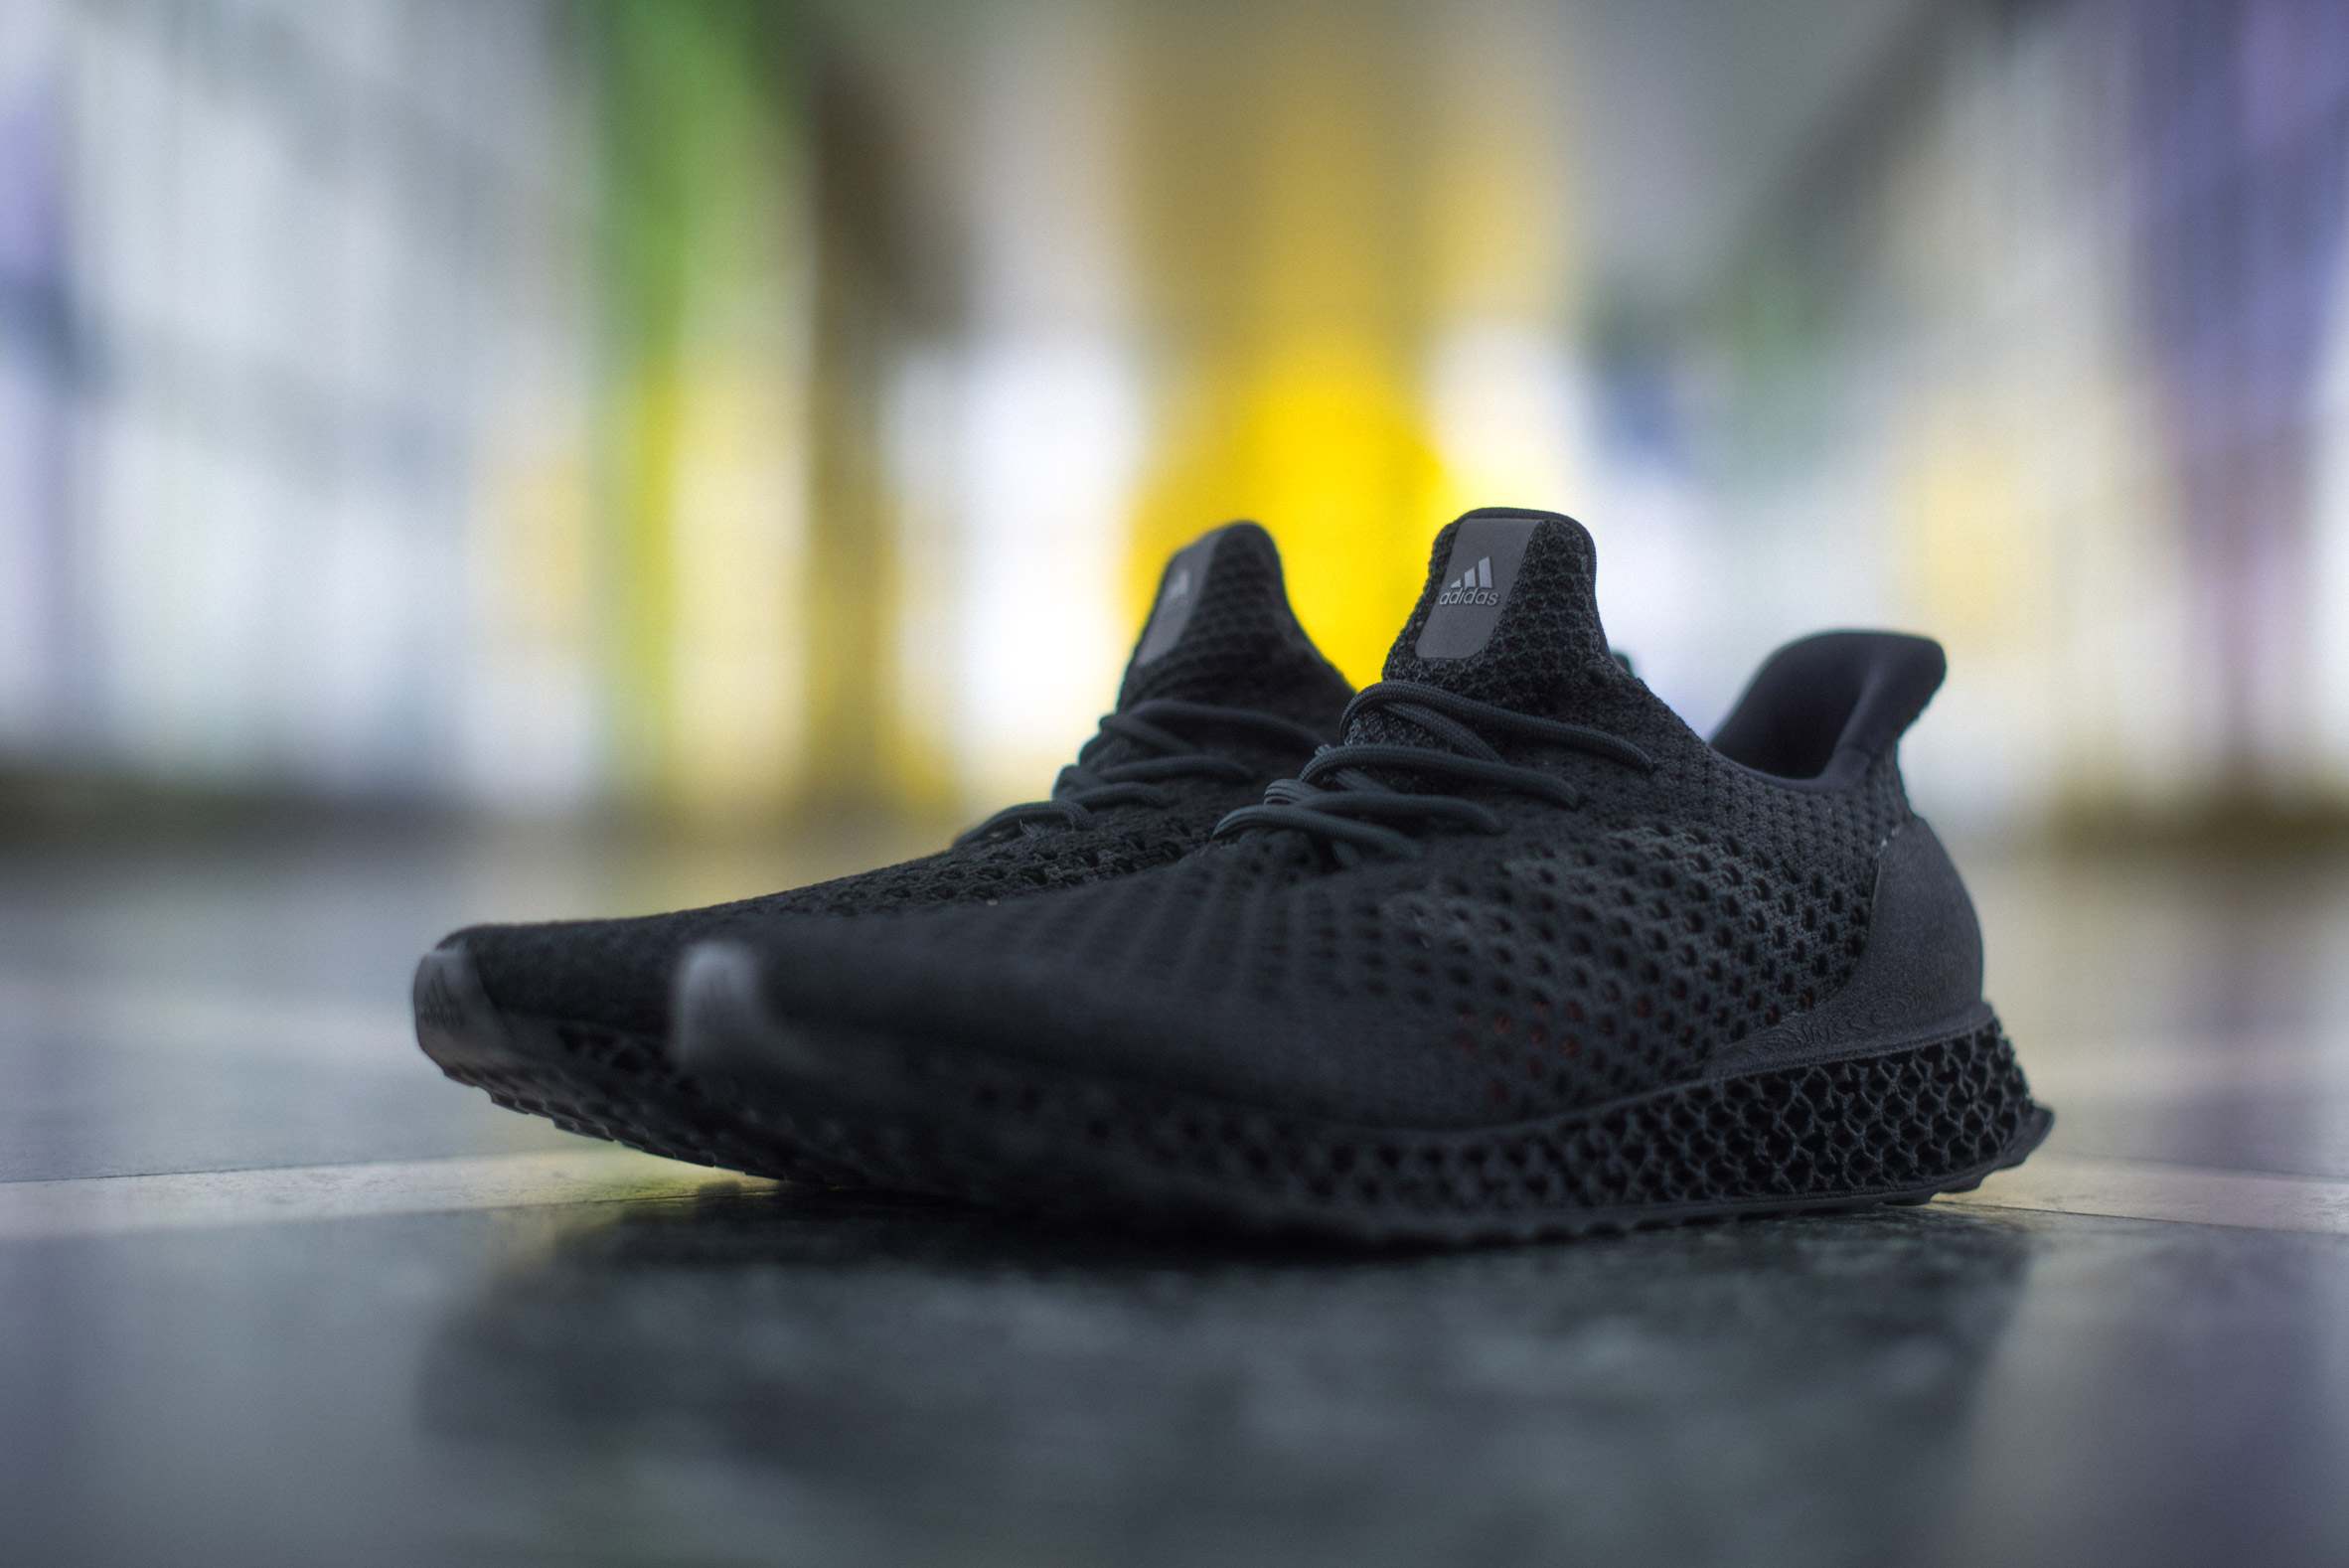 Continent Ongemak contant geld 3D-printed Adidas trainers go on sale